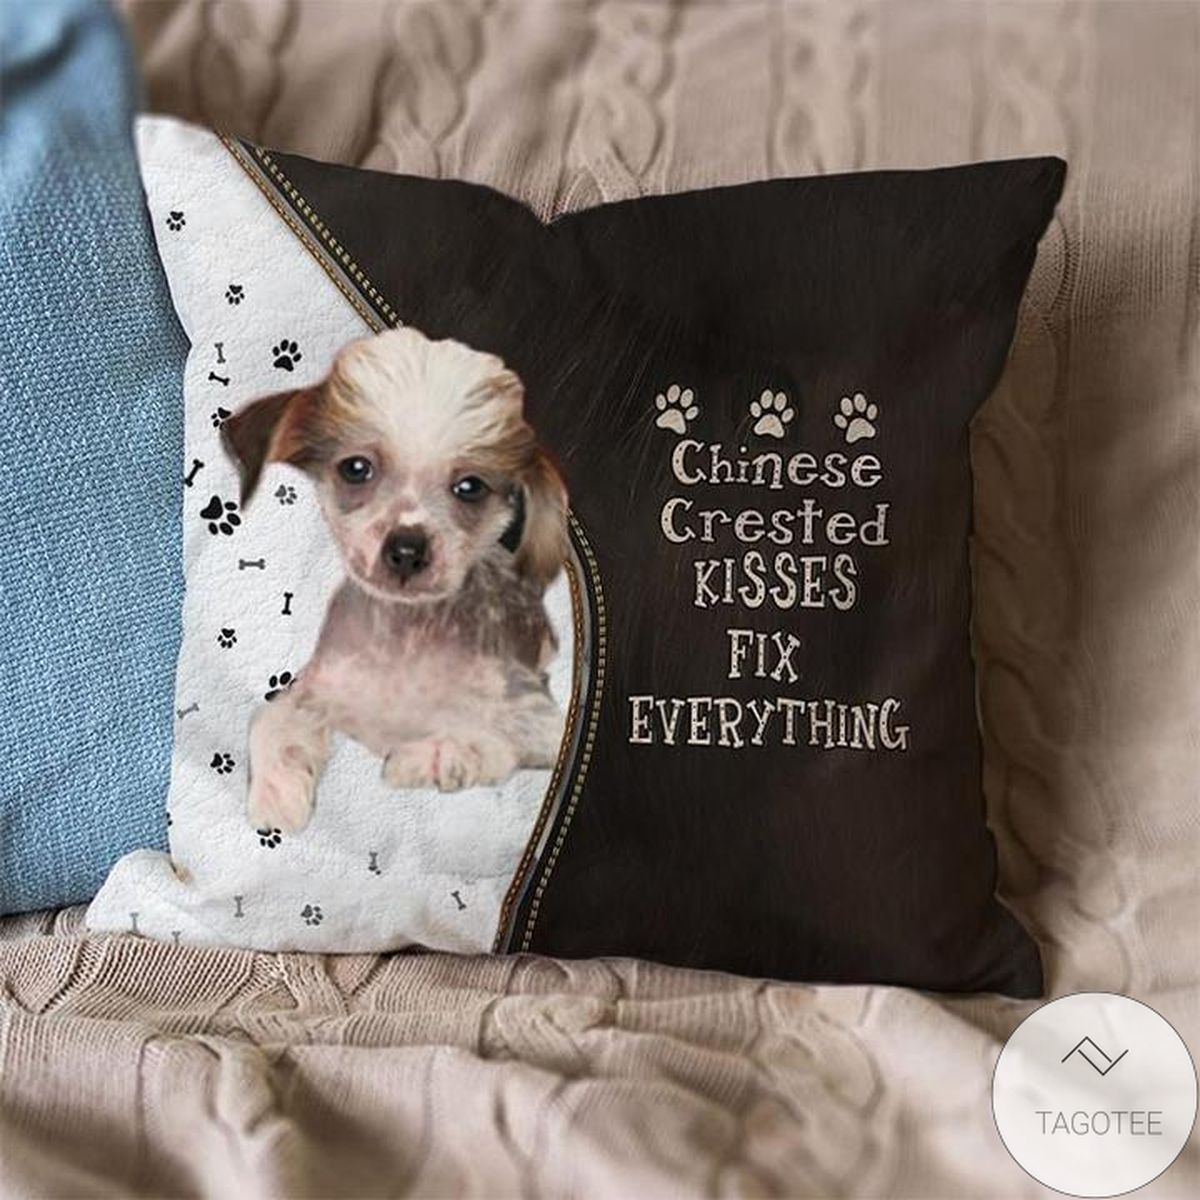 Chinese Crested Kisses Fix Everything Pillowcase